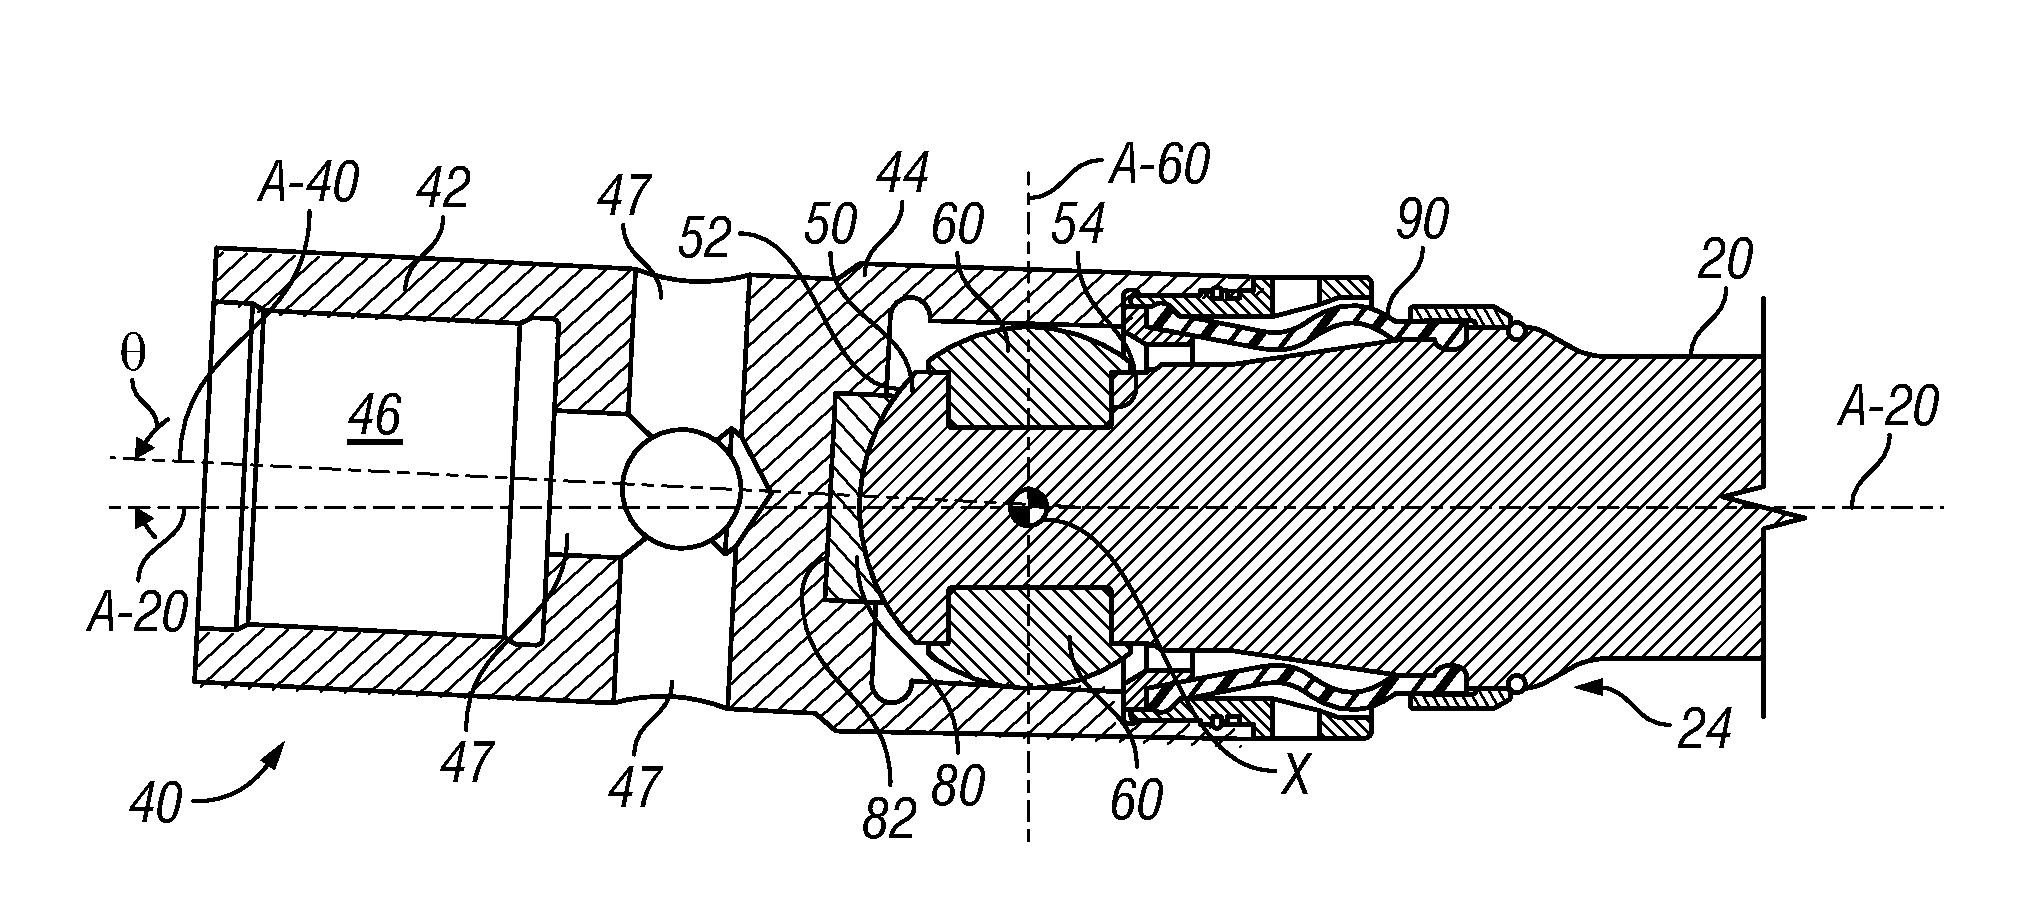 Drive shaft assembly for a downhole motor